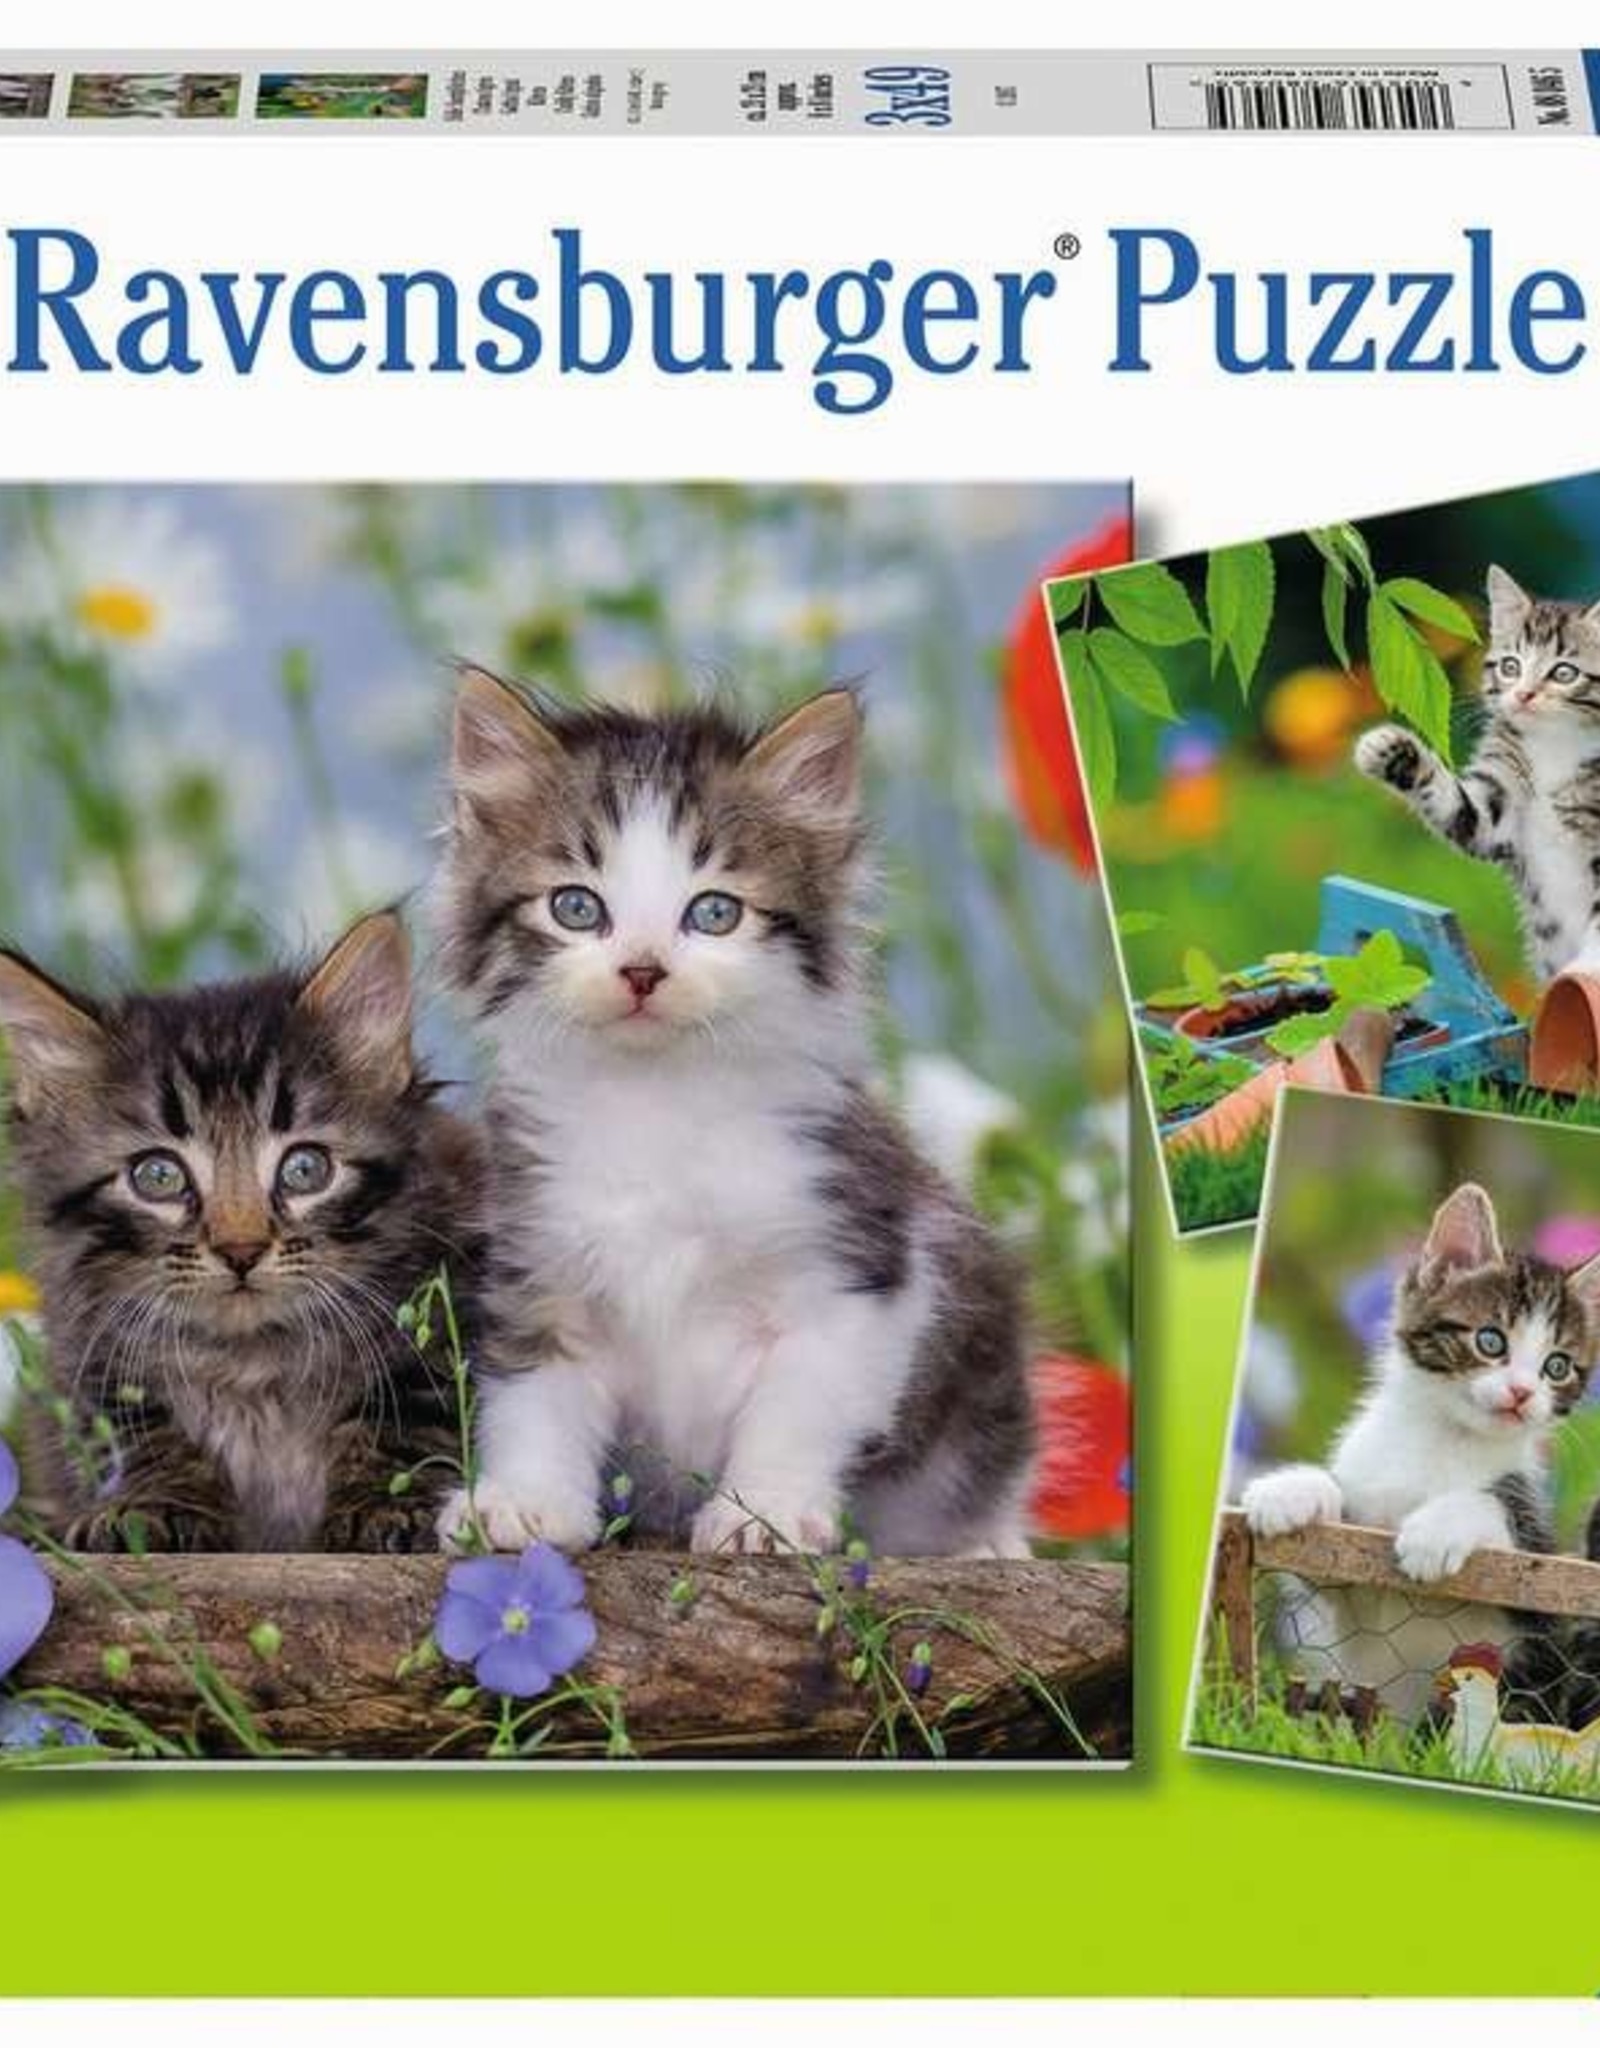 Ravensburger 3 x 49pc Cuddly Kittens Puzzle